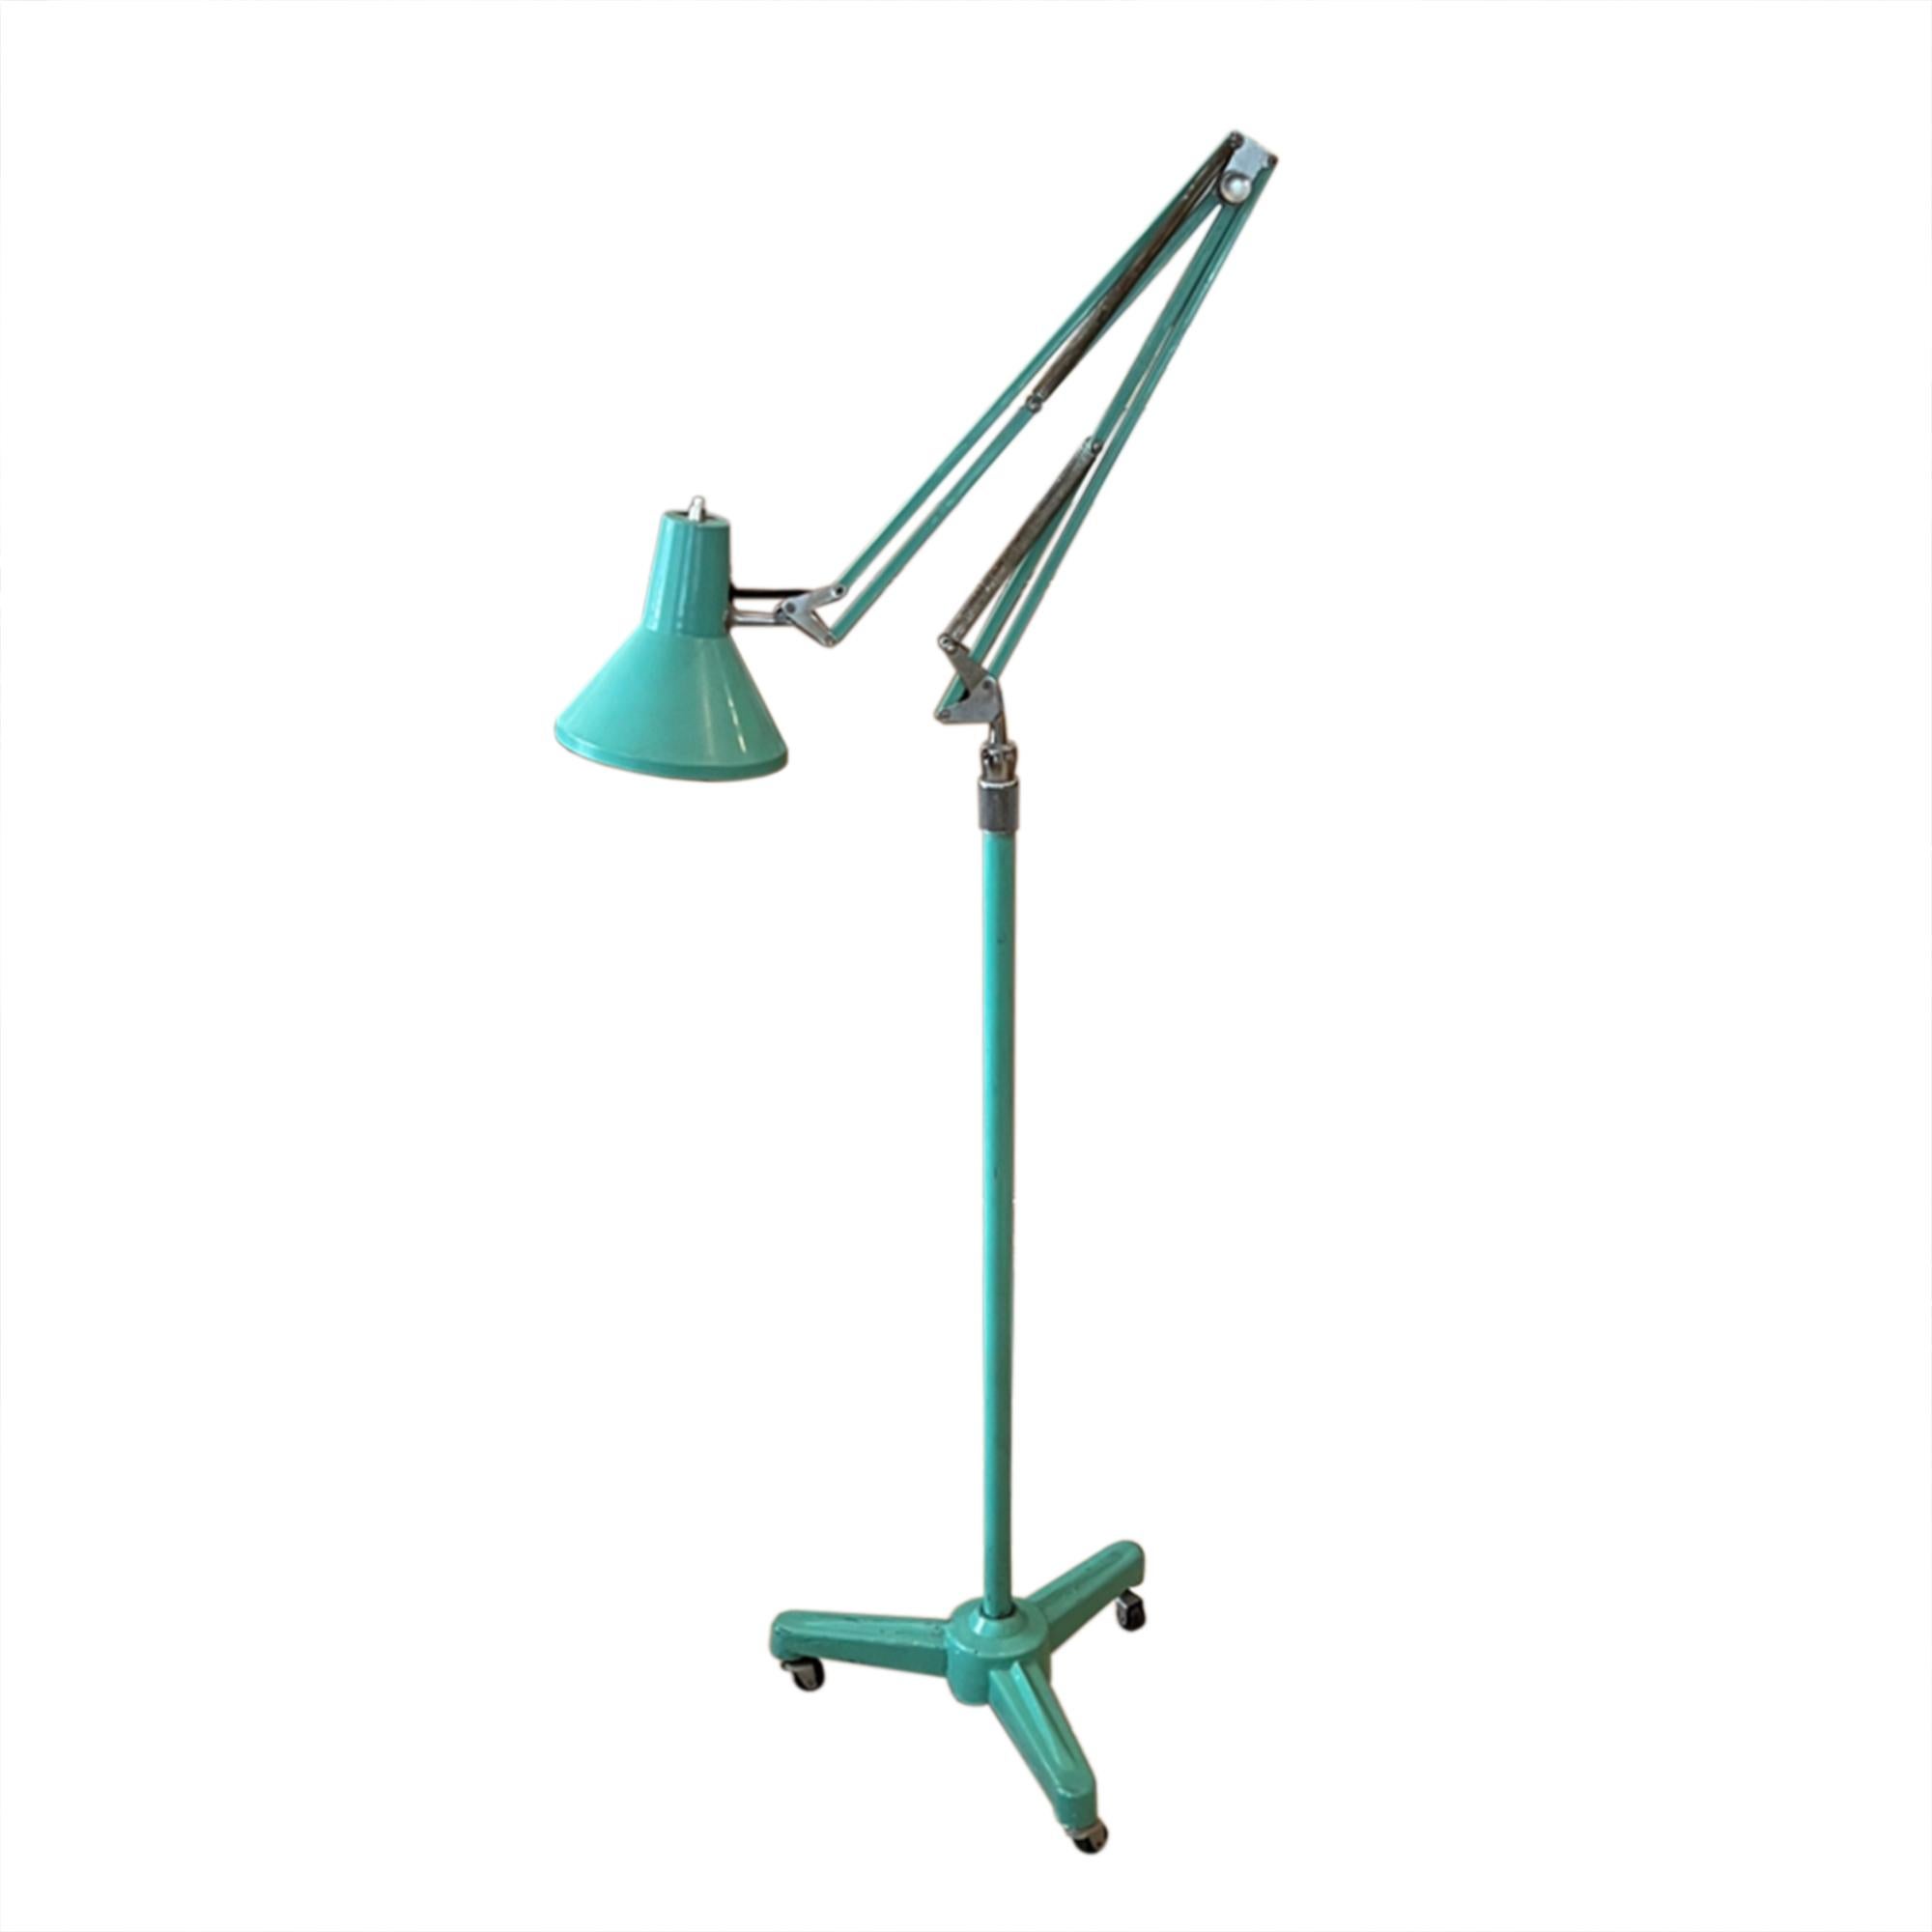 This French mid century floor lamp is fully adjustable and sits on a tripod stand with castors. 

The original light green - turquoise paint gives this light a cheerful character. We've had it rewired with black, rope twisted silk flex, the button